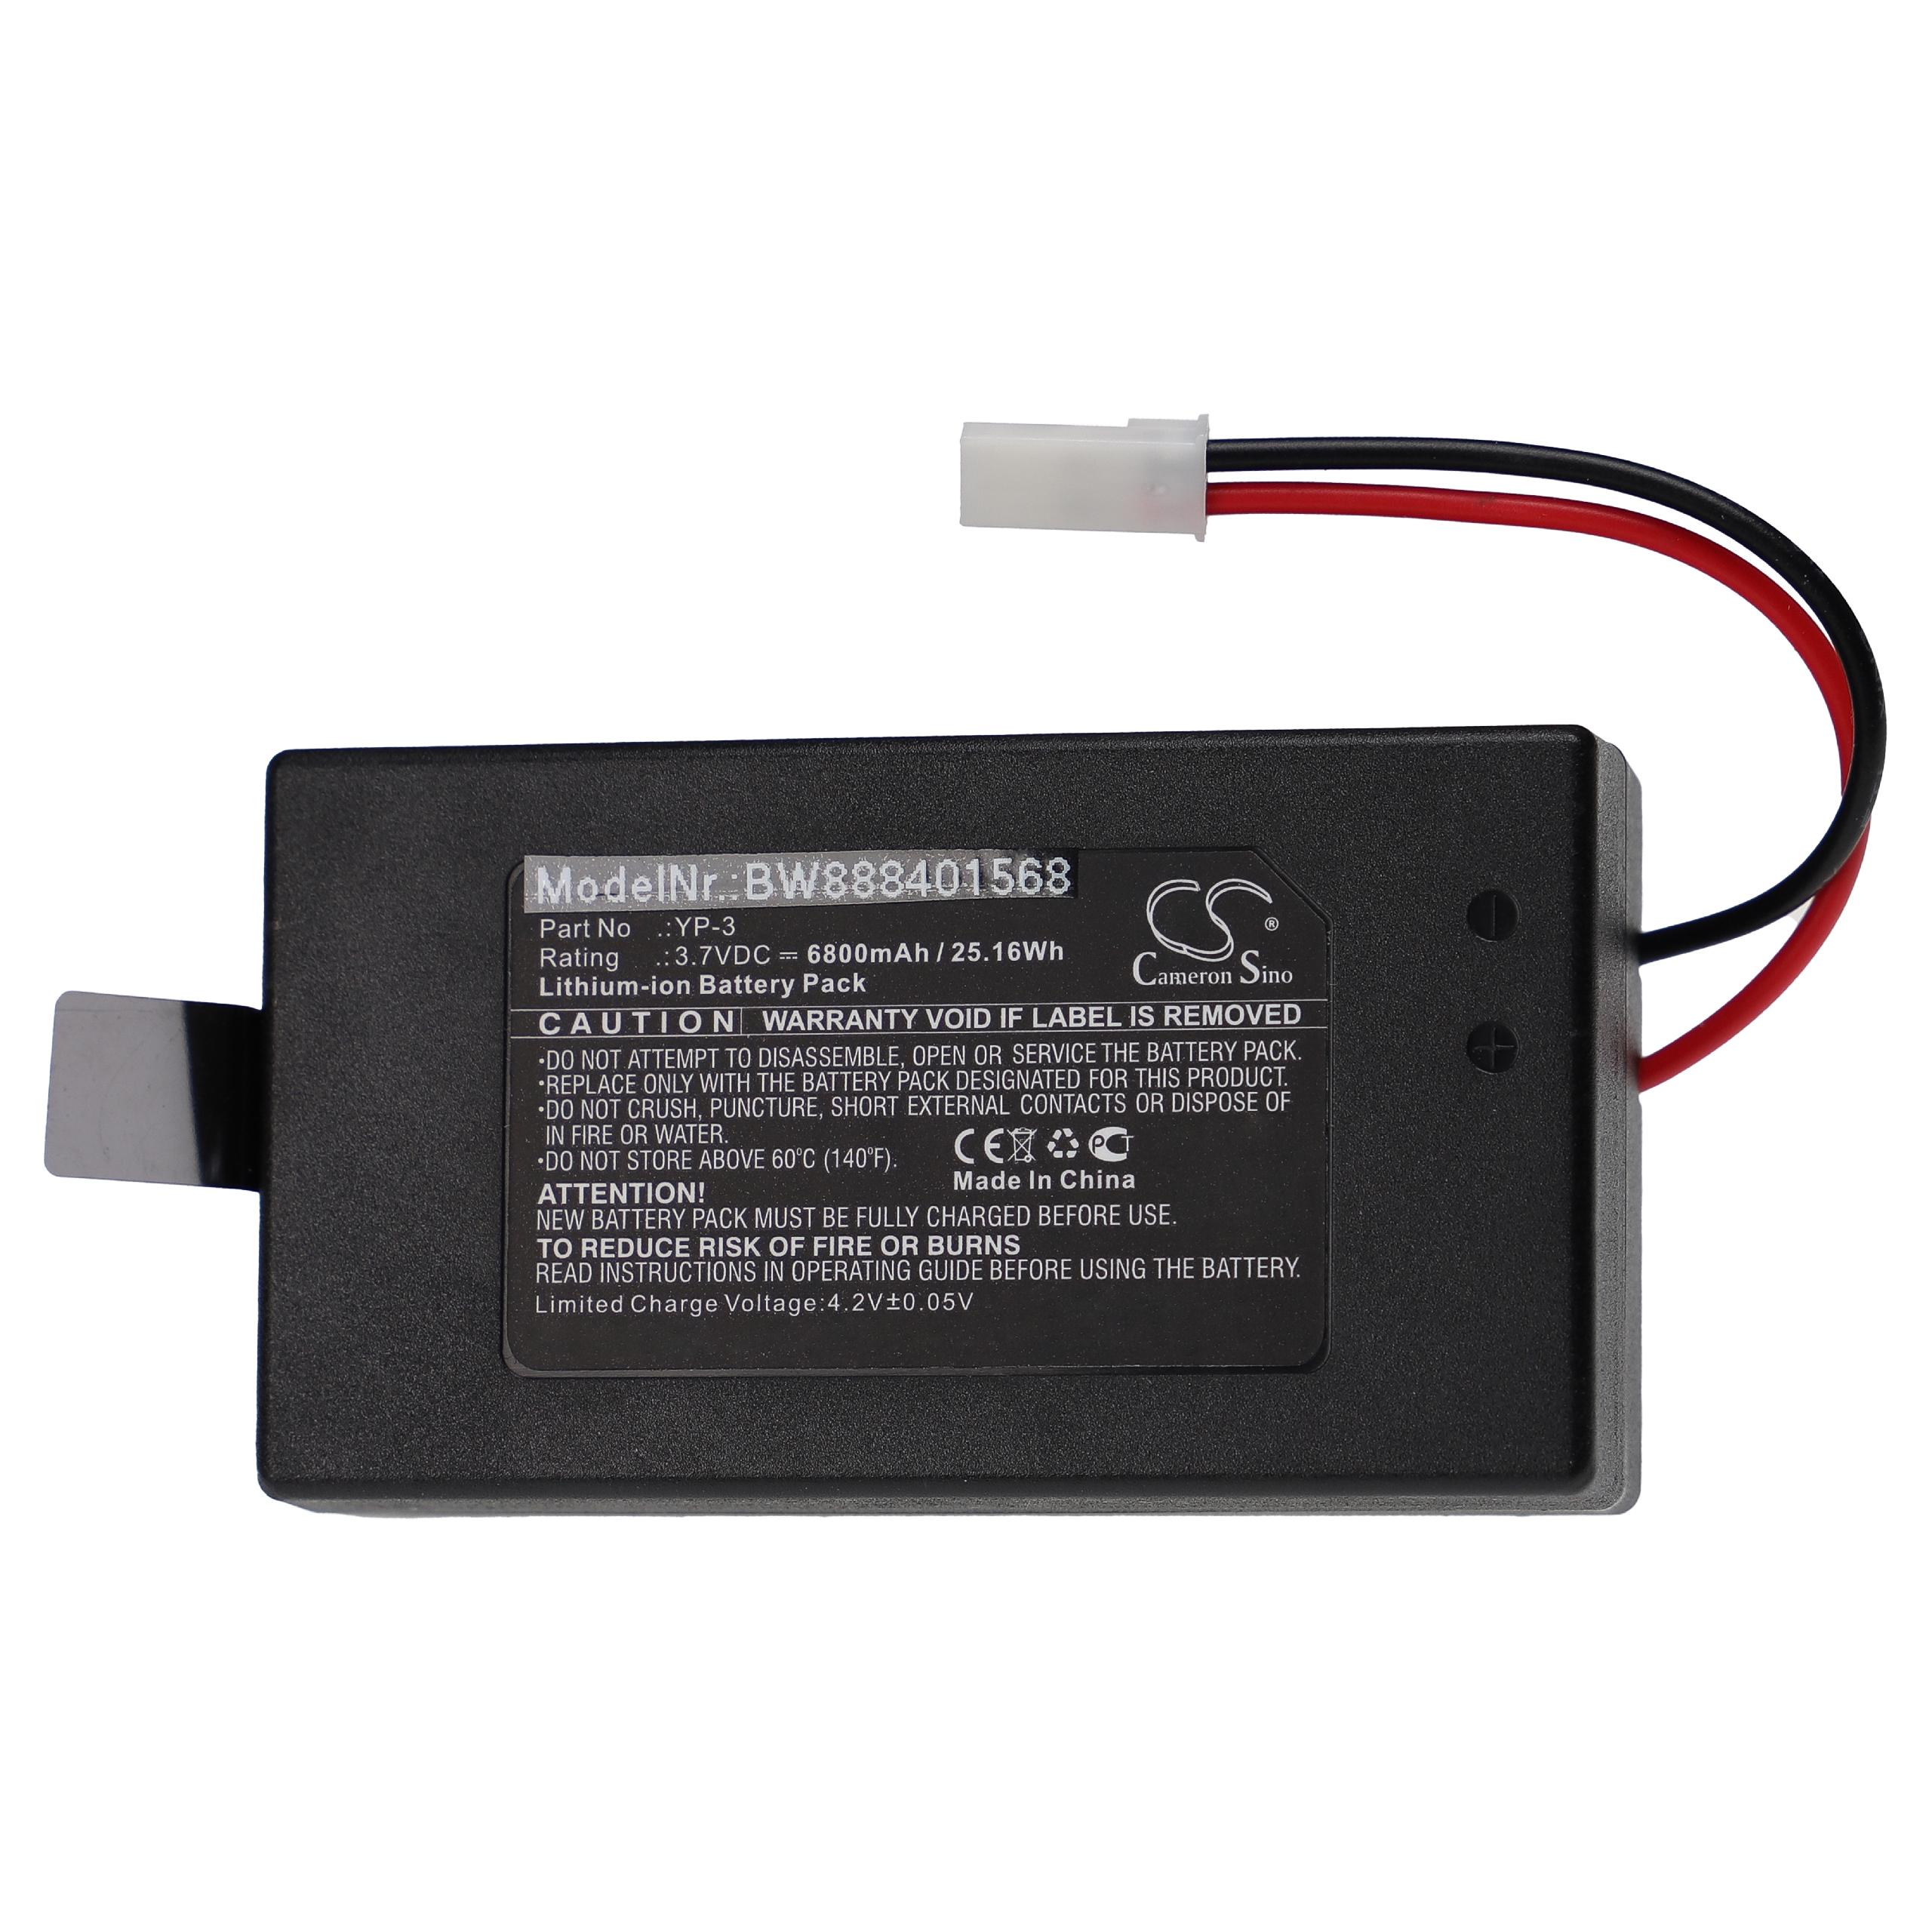 Model Making Device Battery Replacement for Yuneec YP-3 - 6800mAh 3.7V Li-Ion